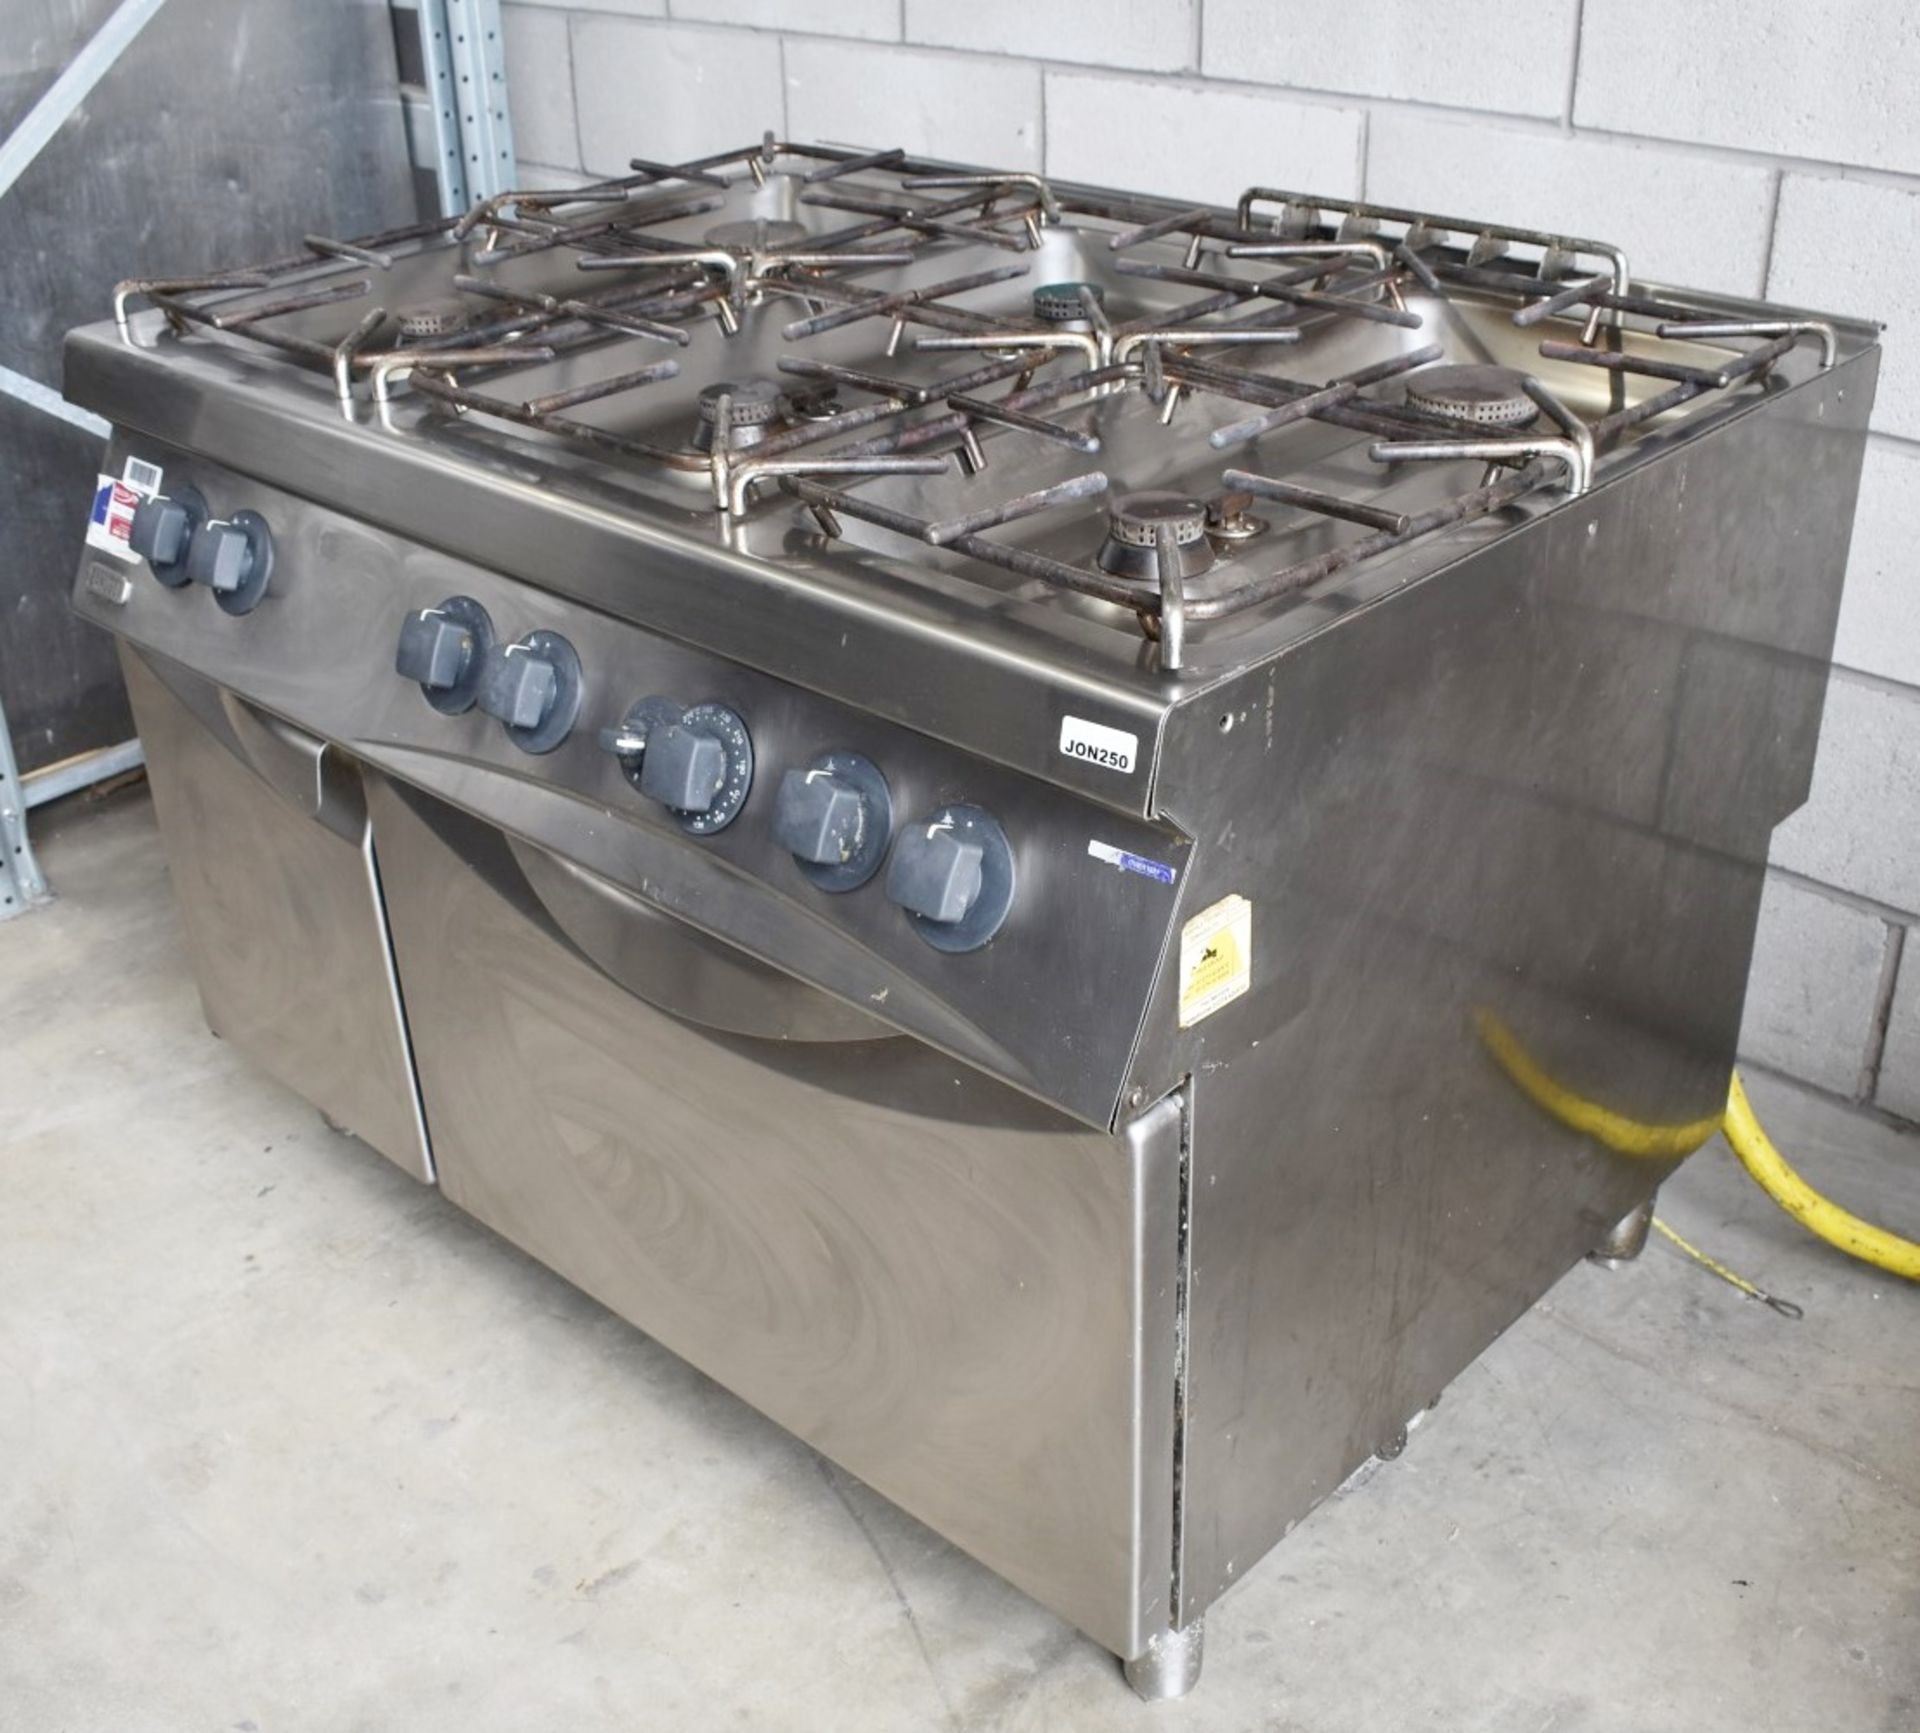 1 x Zanussi 6 Burner Gas Range Cooker with a Stainless Steel Exterior - Image 11 of 18